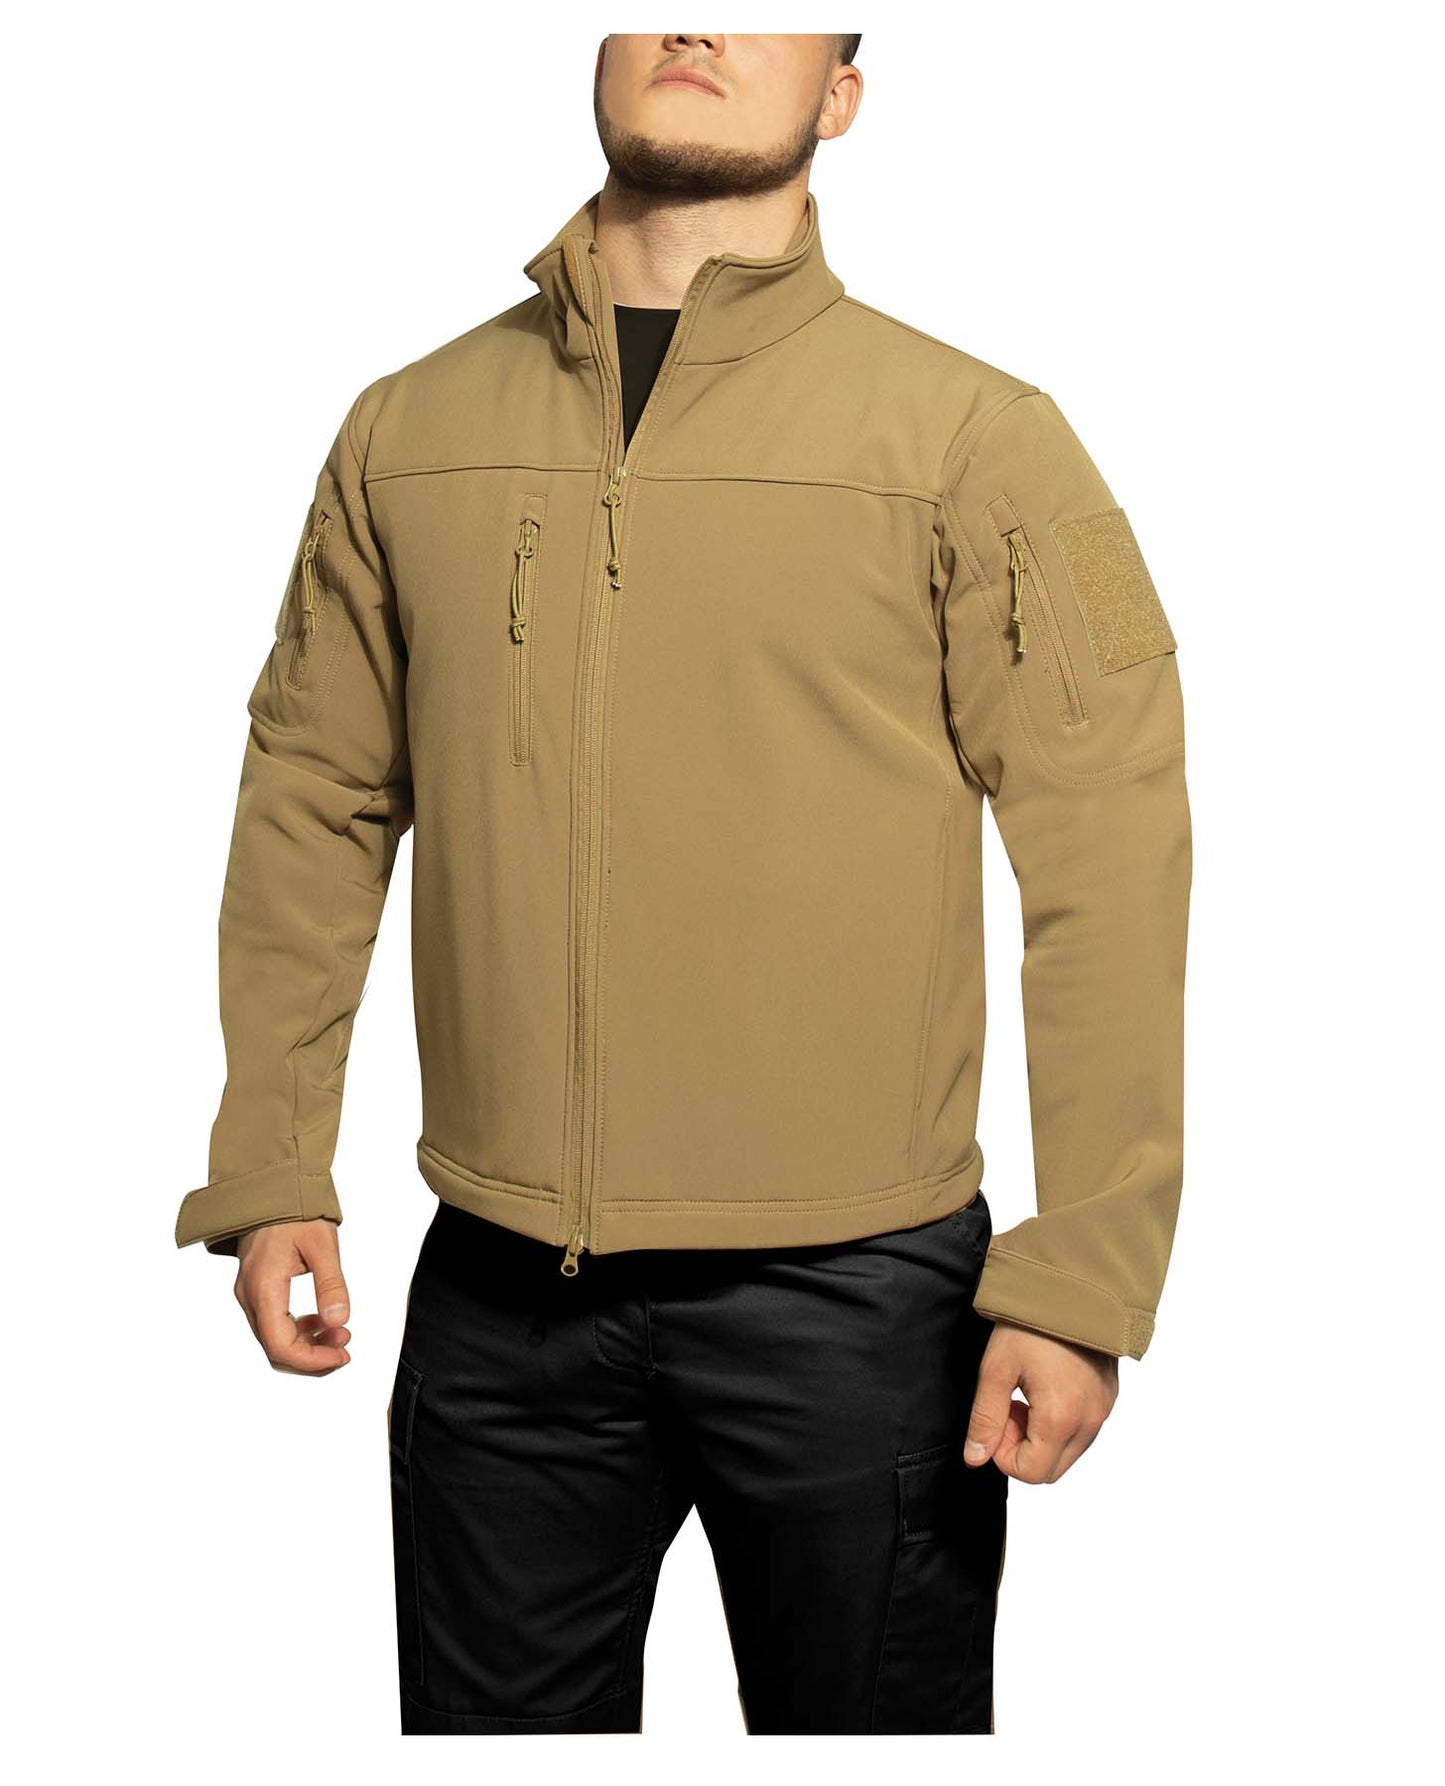 Rothco Stealth Ops Soft Shell Tactical Jacket - Coyote Brown